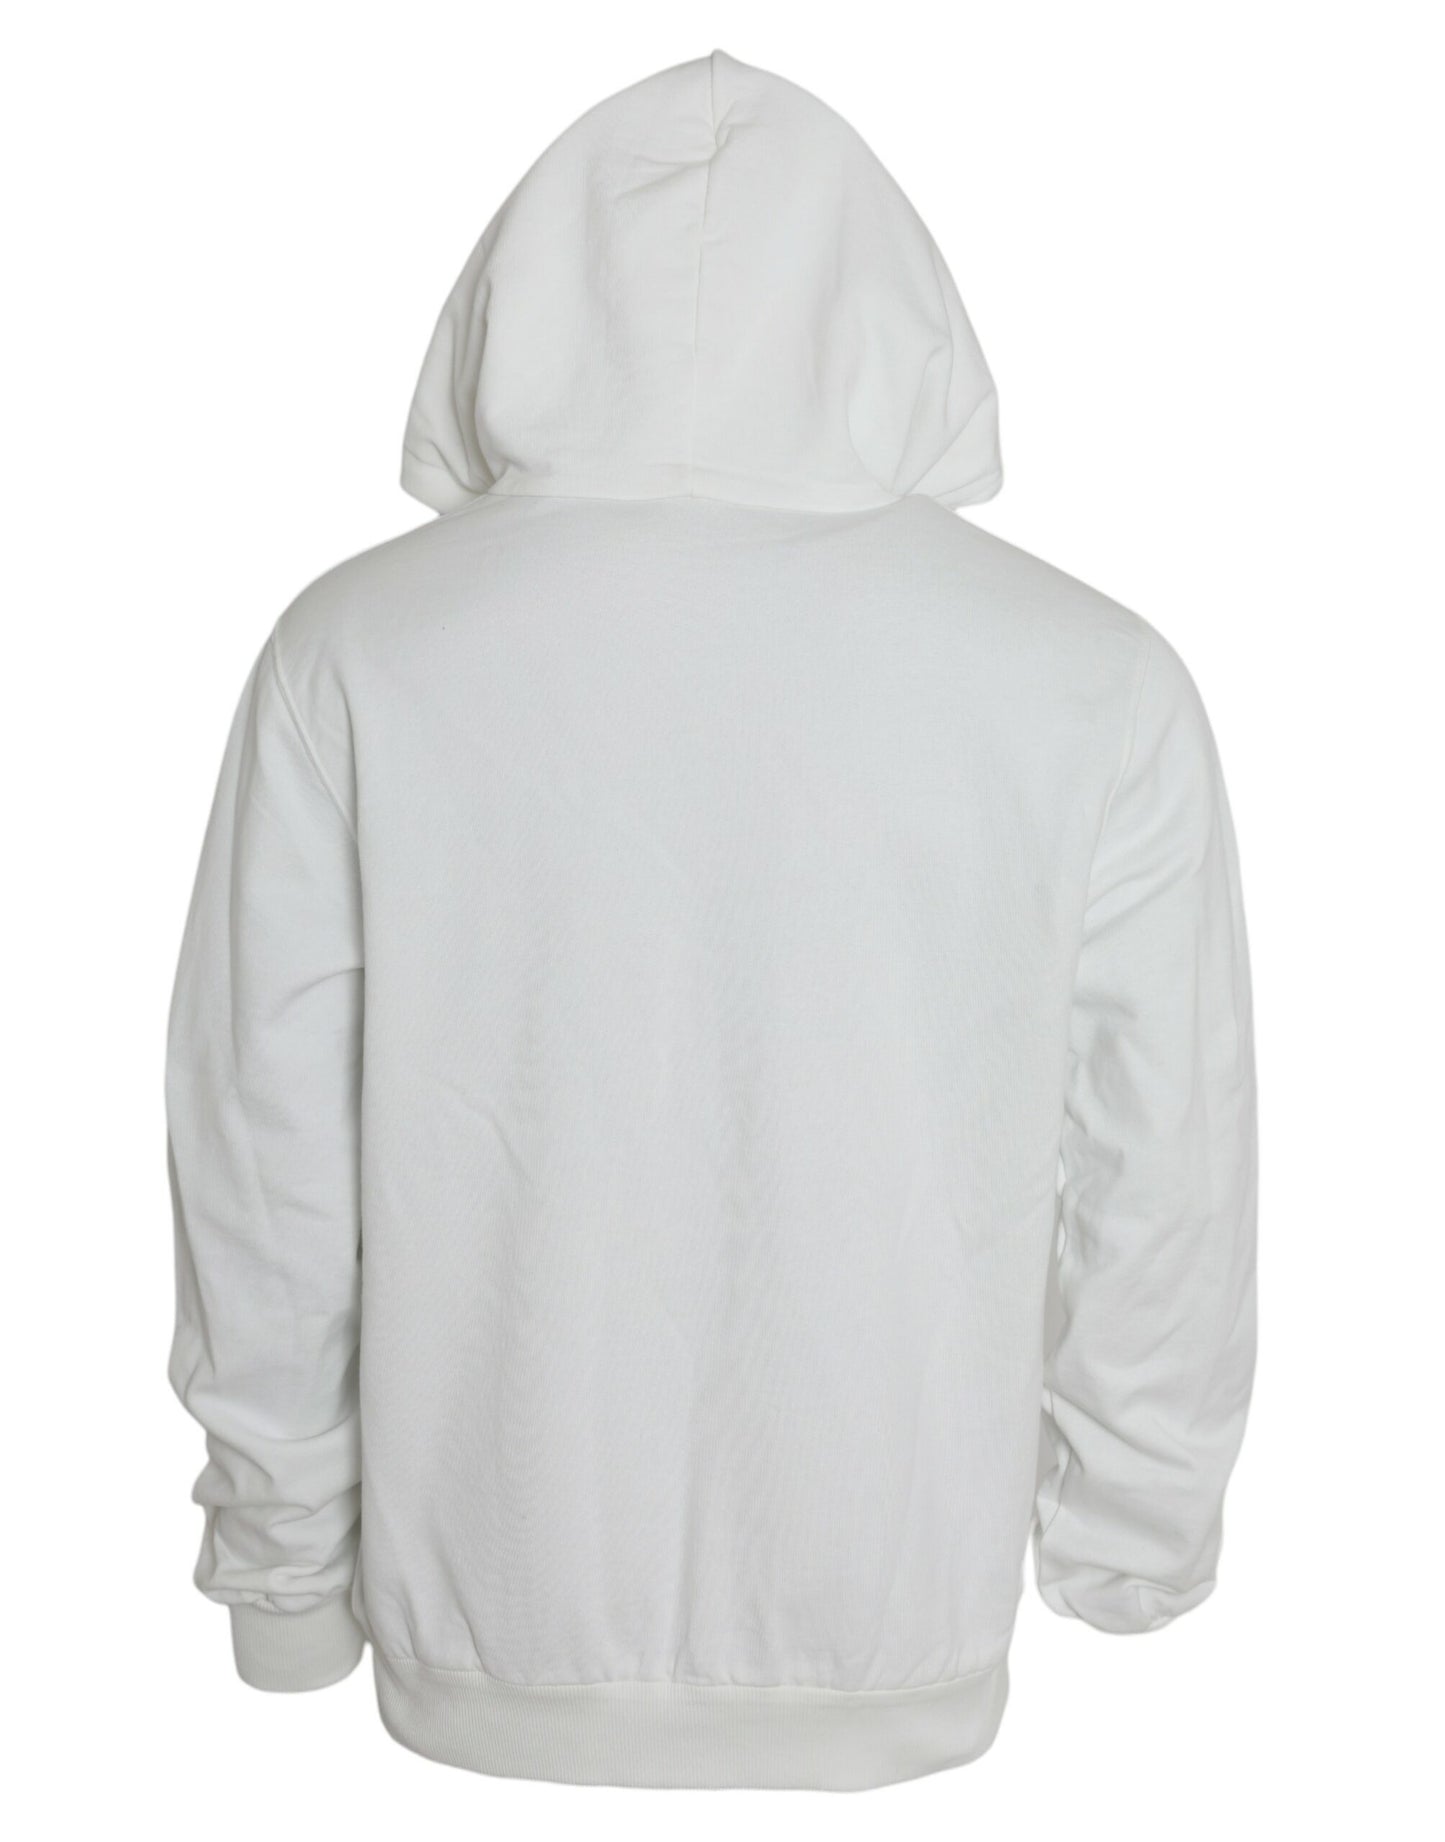 White Cotton Hooded Pullover Sweatshirt Sweater